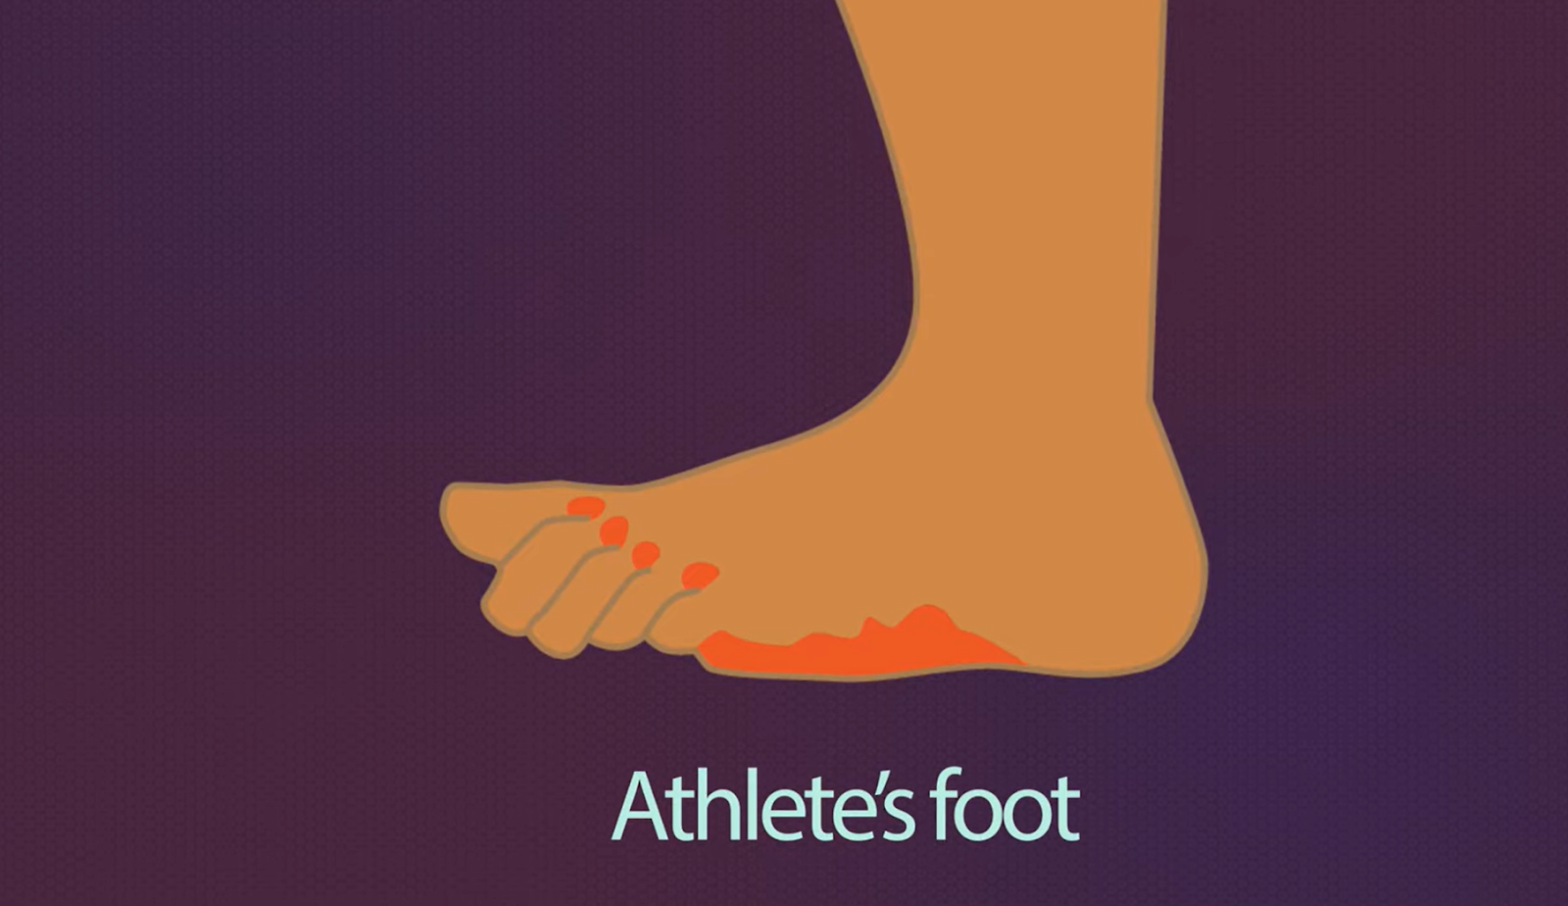 foot with red spots, labeled "Athlete's foot," on a purple background